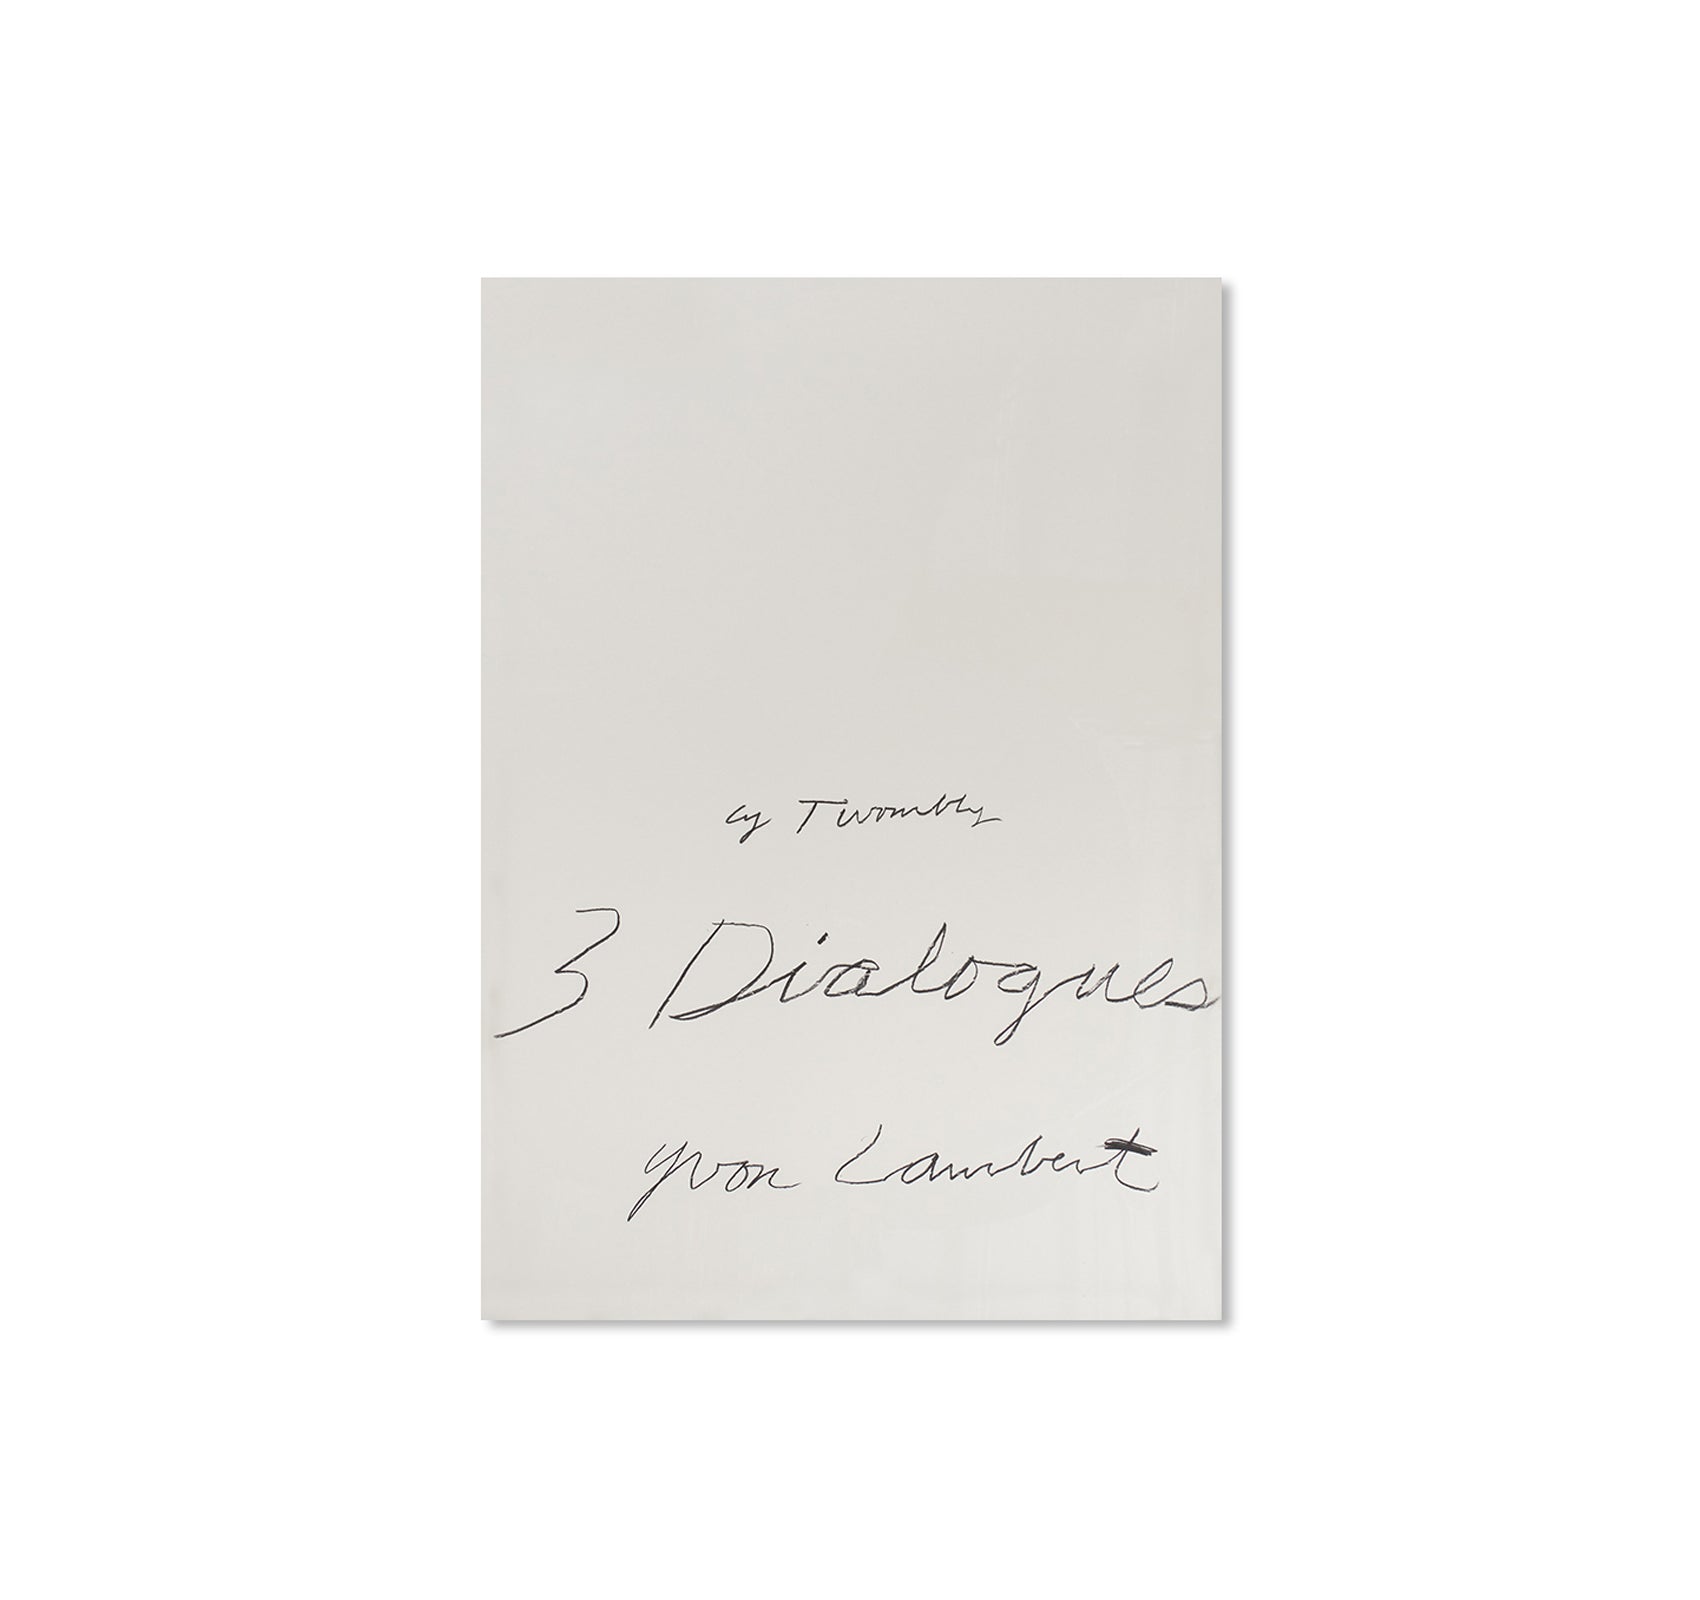 THREE DIALOGUES.1 PRINT (1977) by Cy Twombly